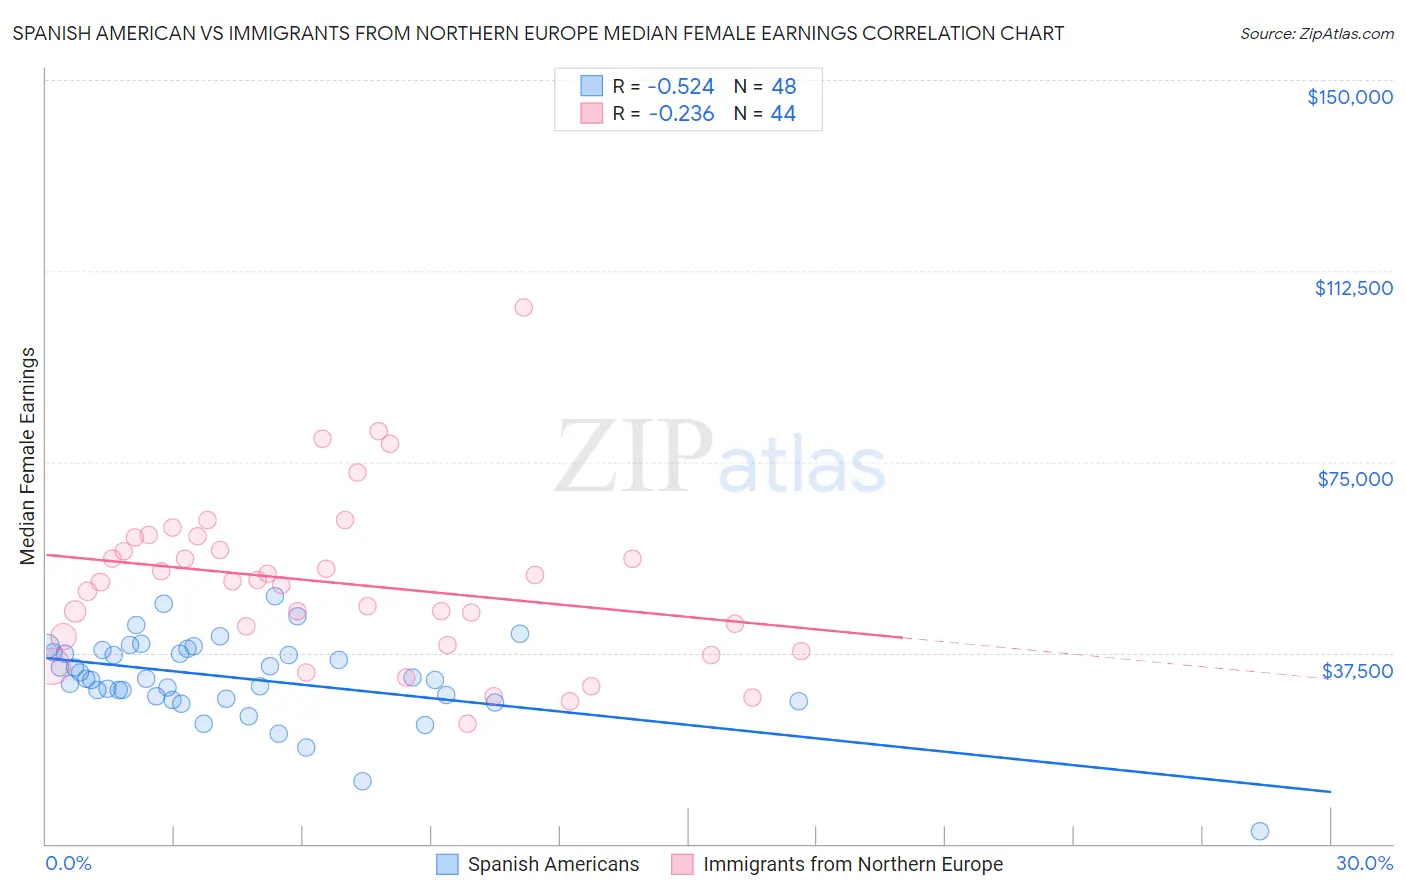 Spanish American vs Immigrants from Northern Europe Median Female Earnings